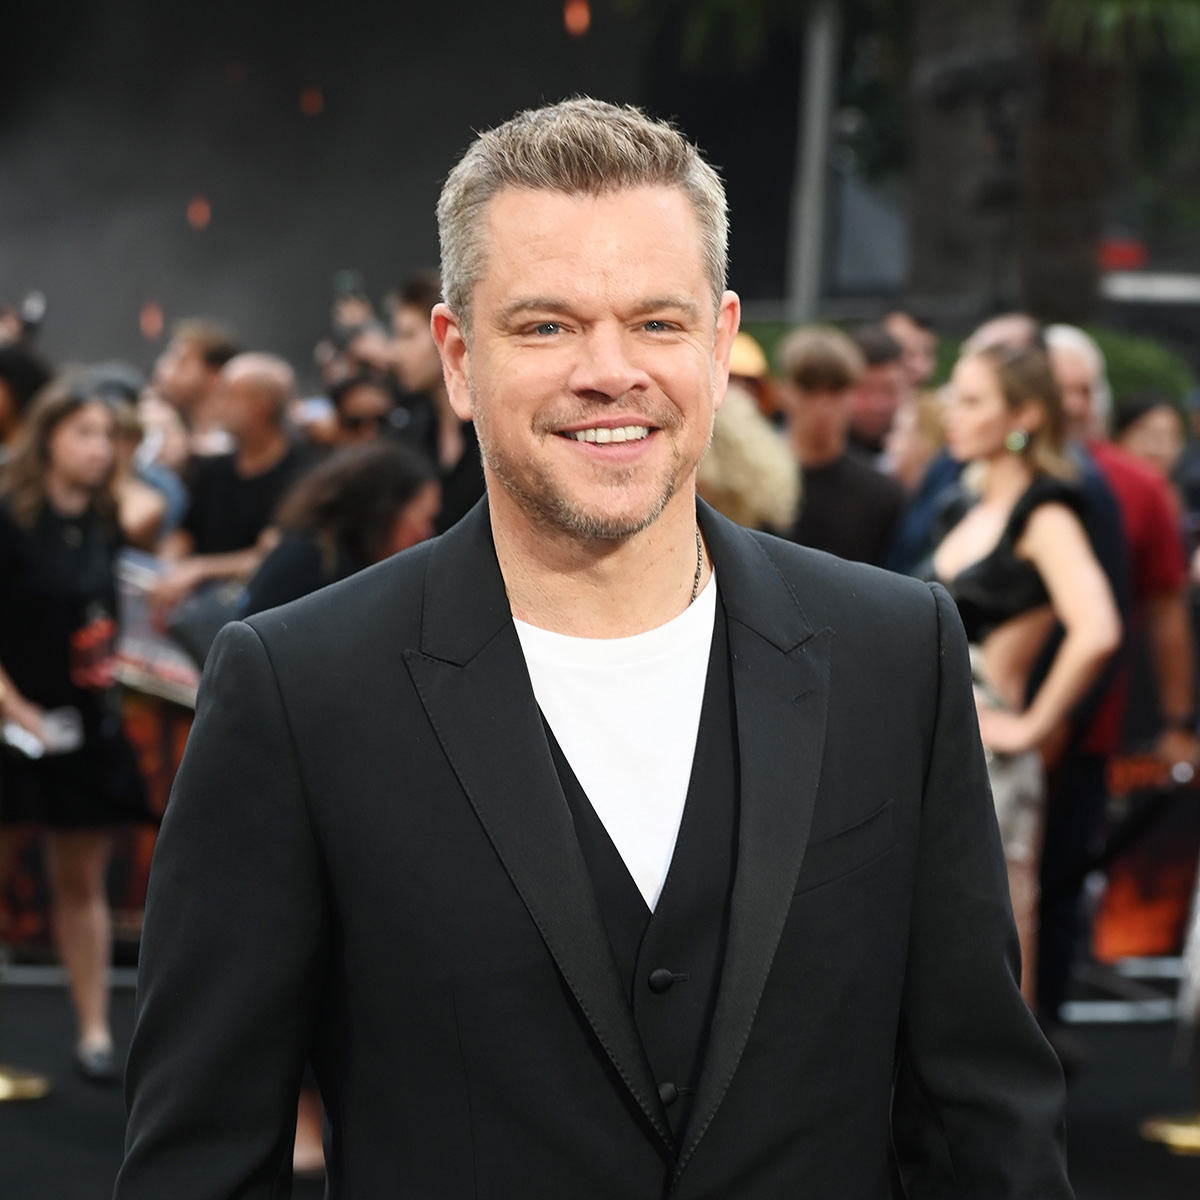 Matt Damon Details “Surreal” Experience of Daughter Heading to College